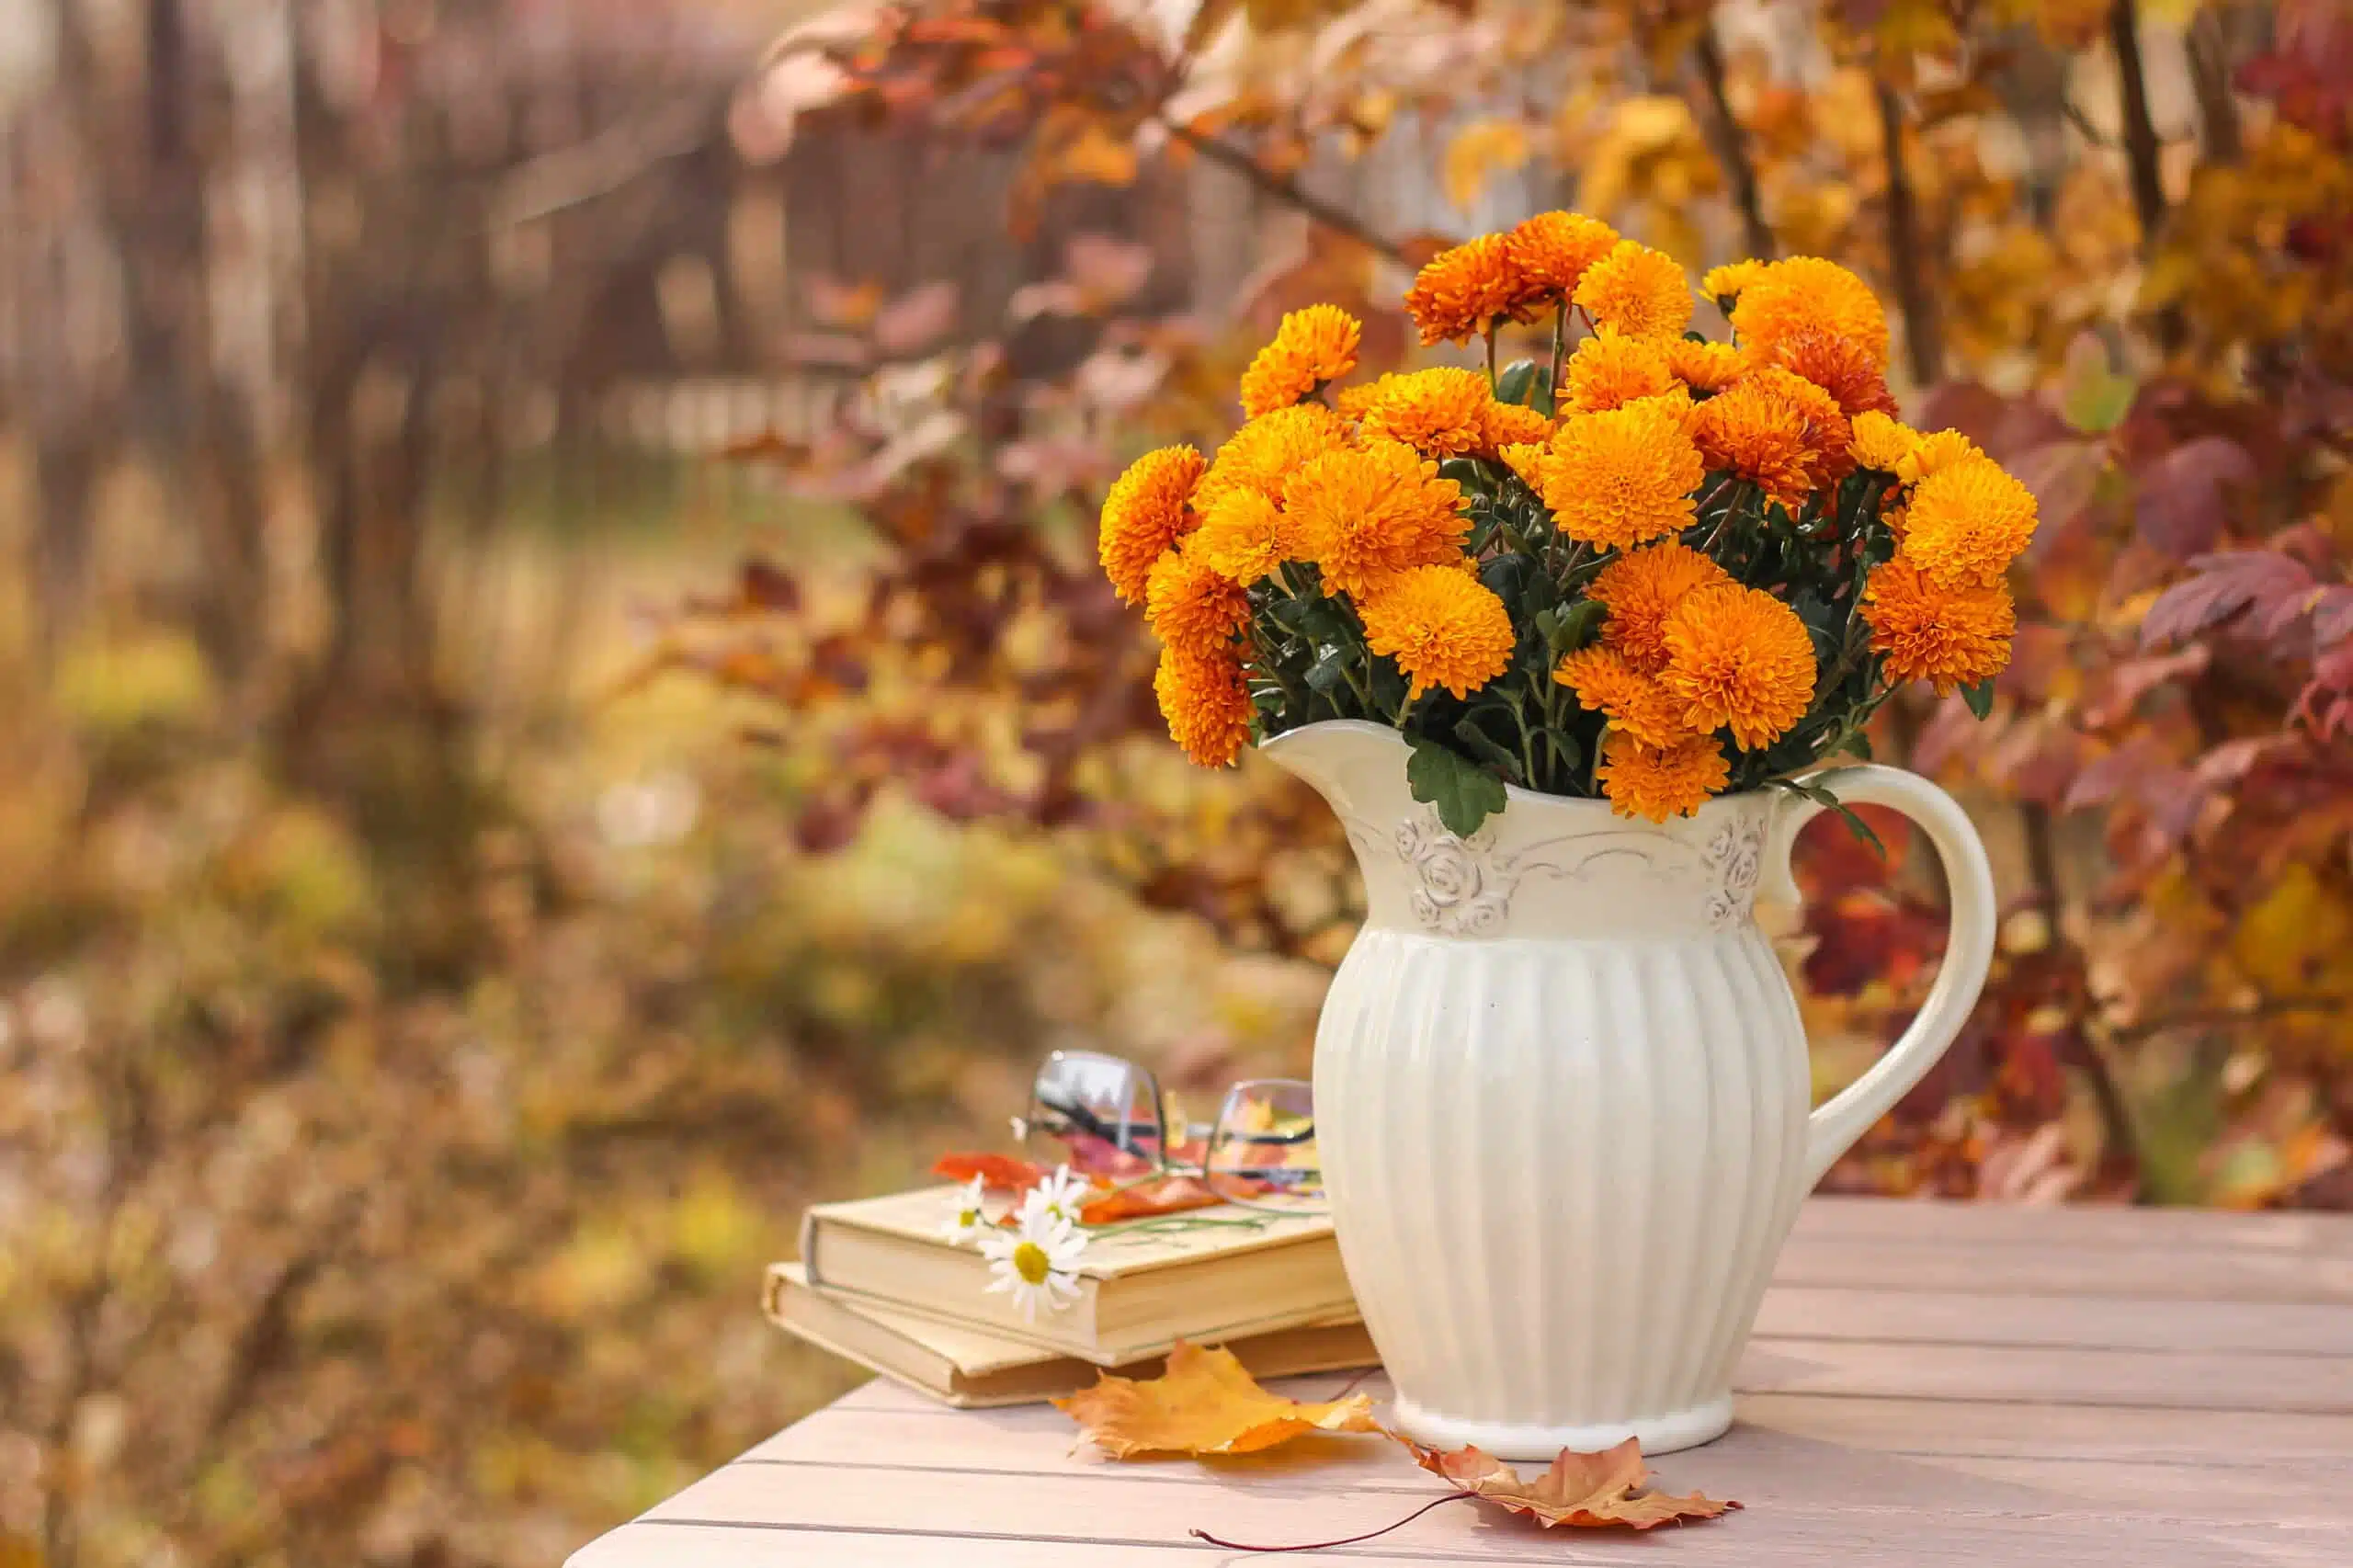 Vase with chrysanthemums and books on the table in the autumn garden.